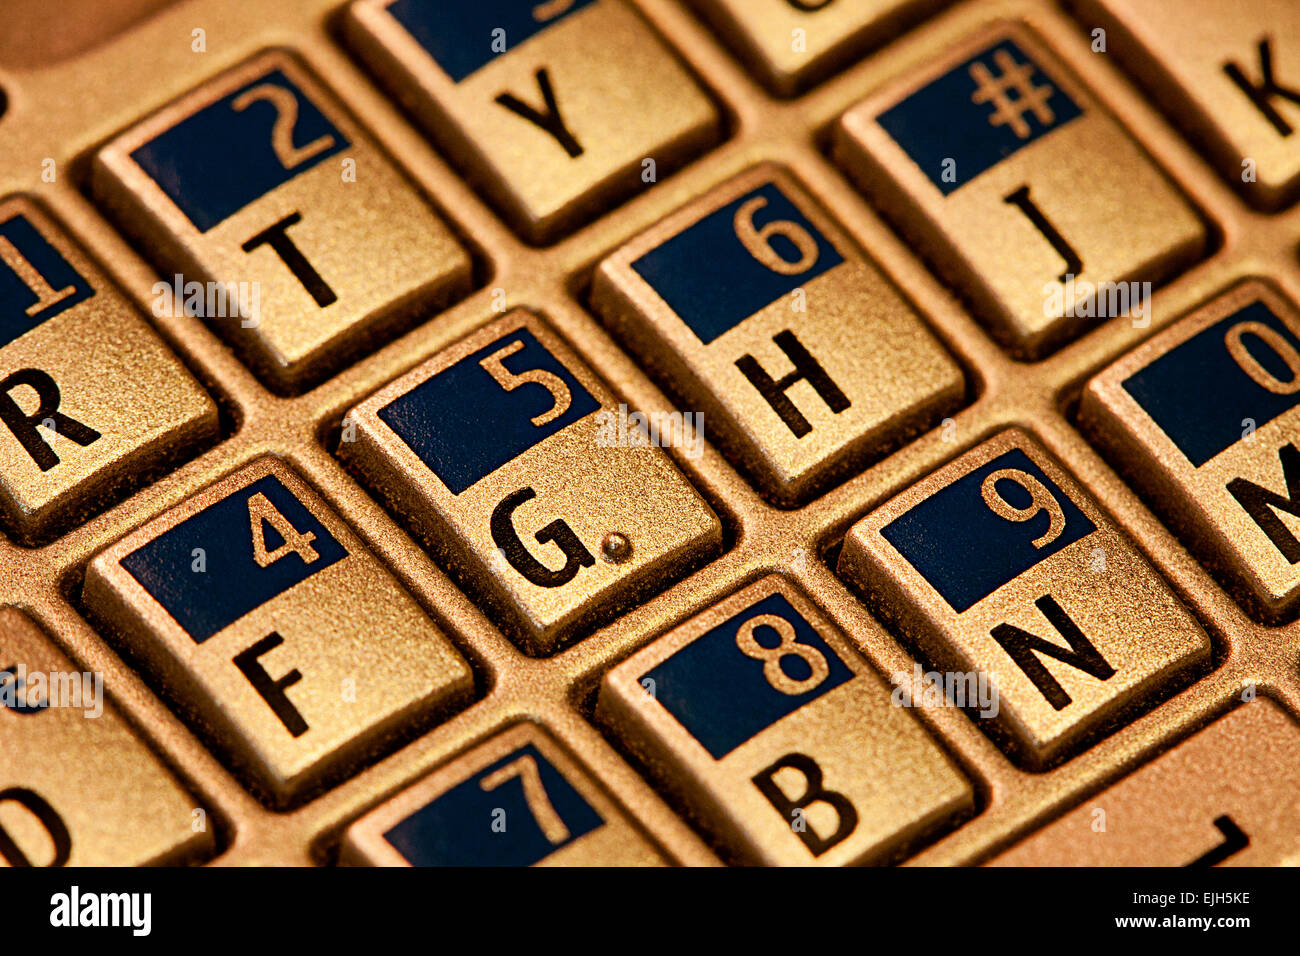 Close up of an old Nokia E61 cell phone keyboard Stock Photo